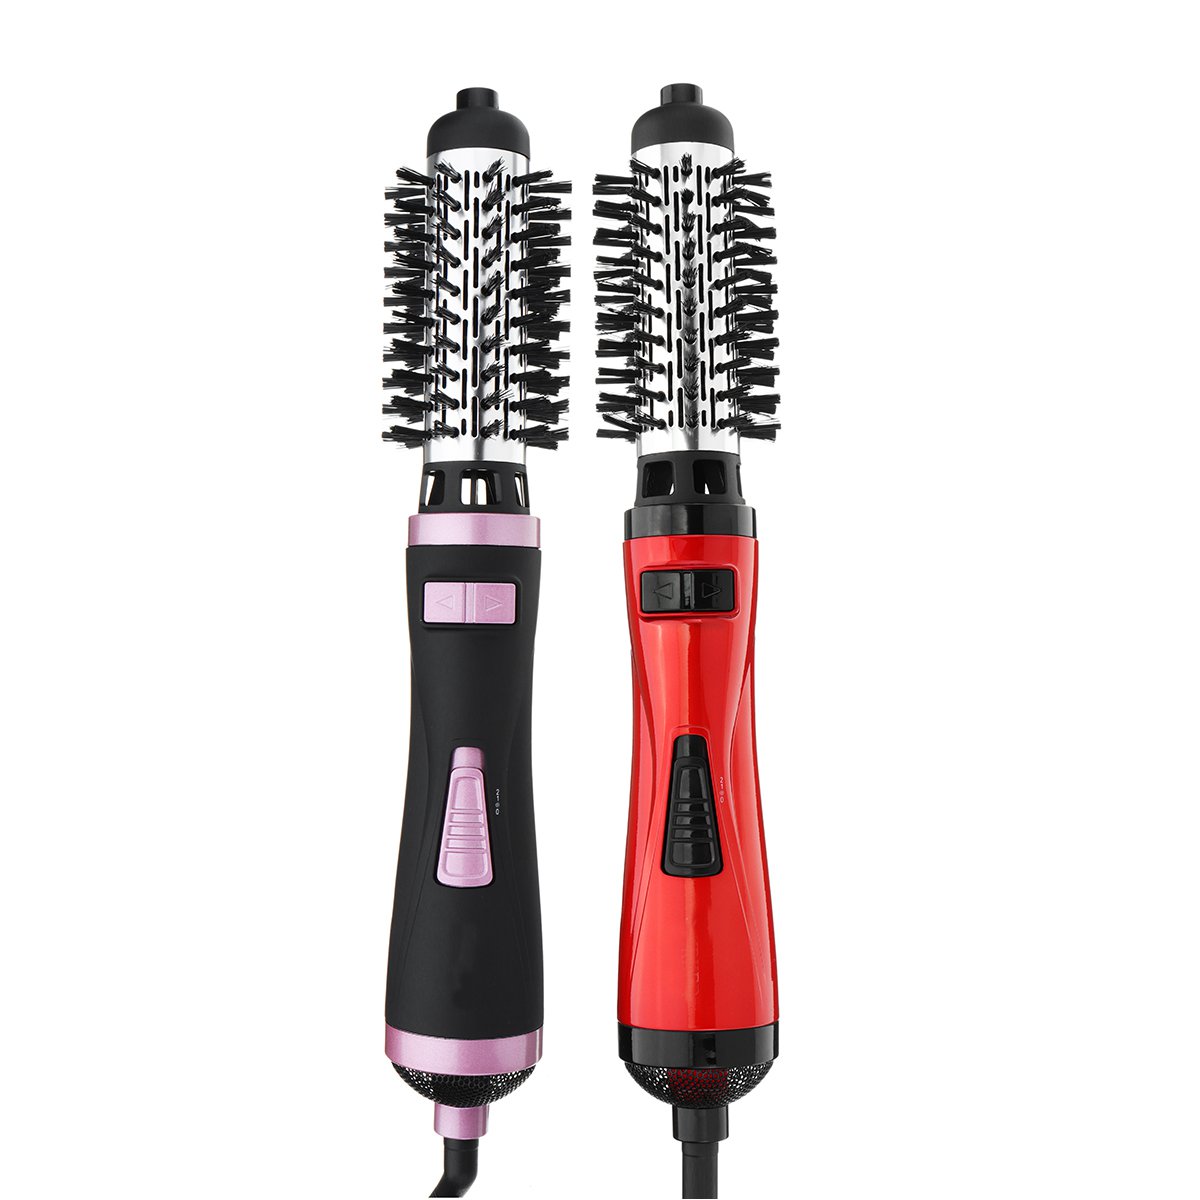 

SURKER 2 in 1 Automatic Rotating Hair Curlers Roller Styler